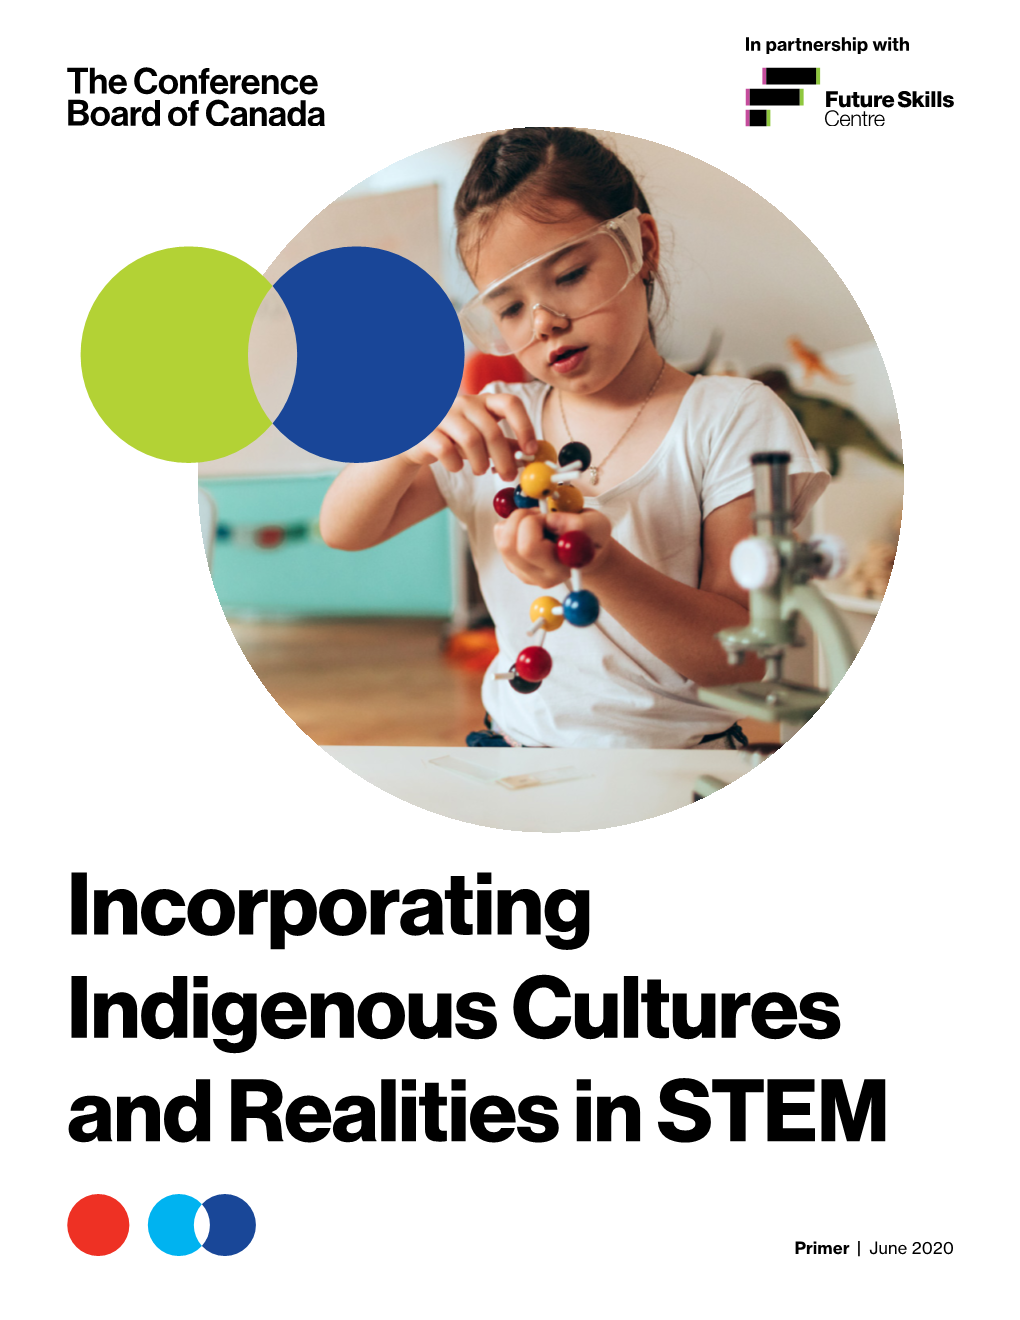 Incorporating Indigenous Cultures and Realities in STEM